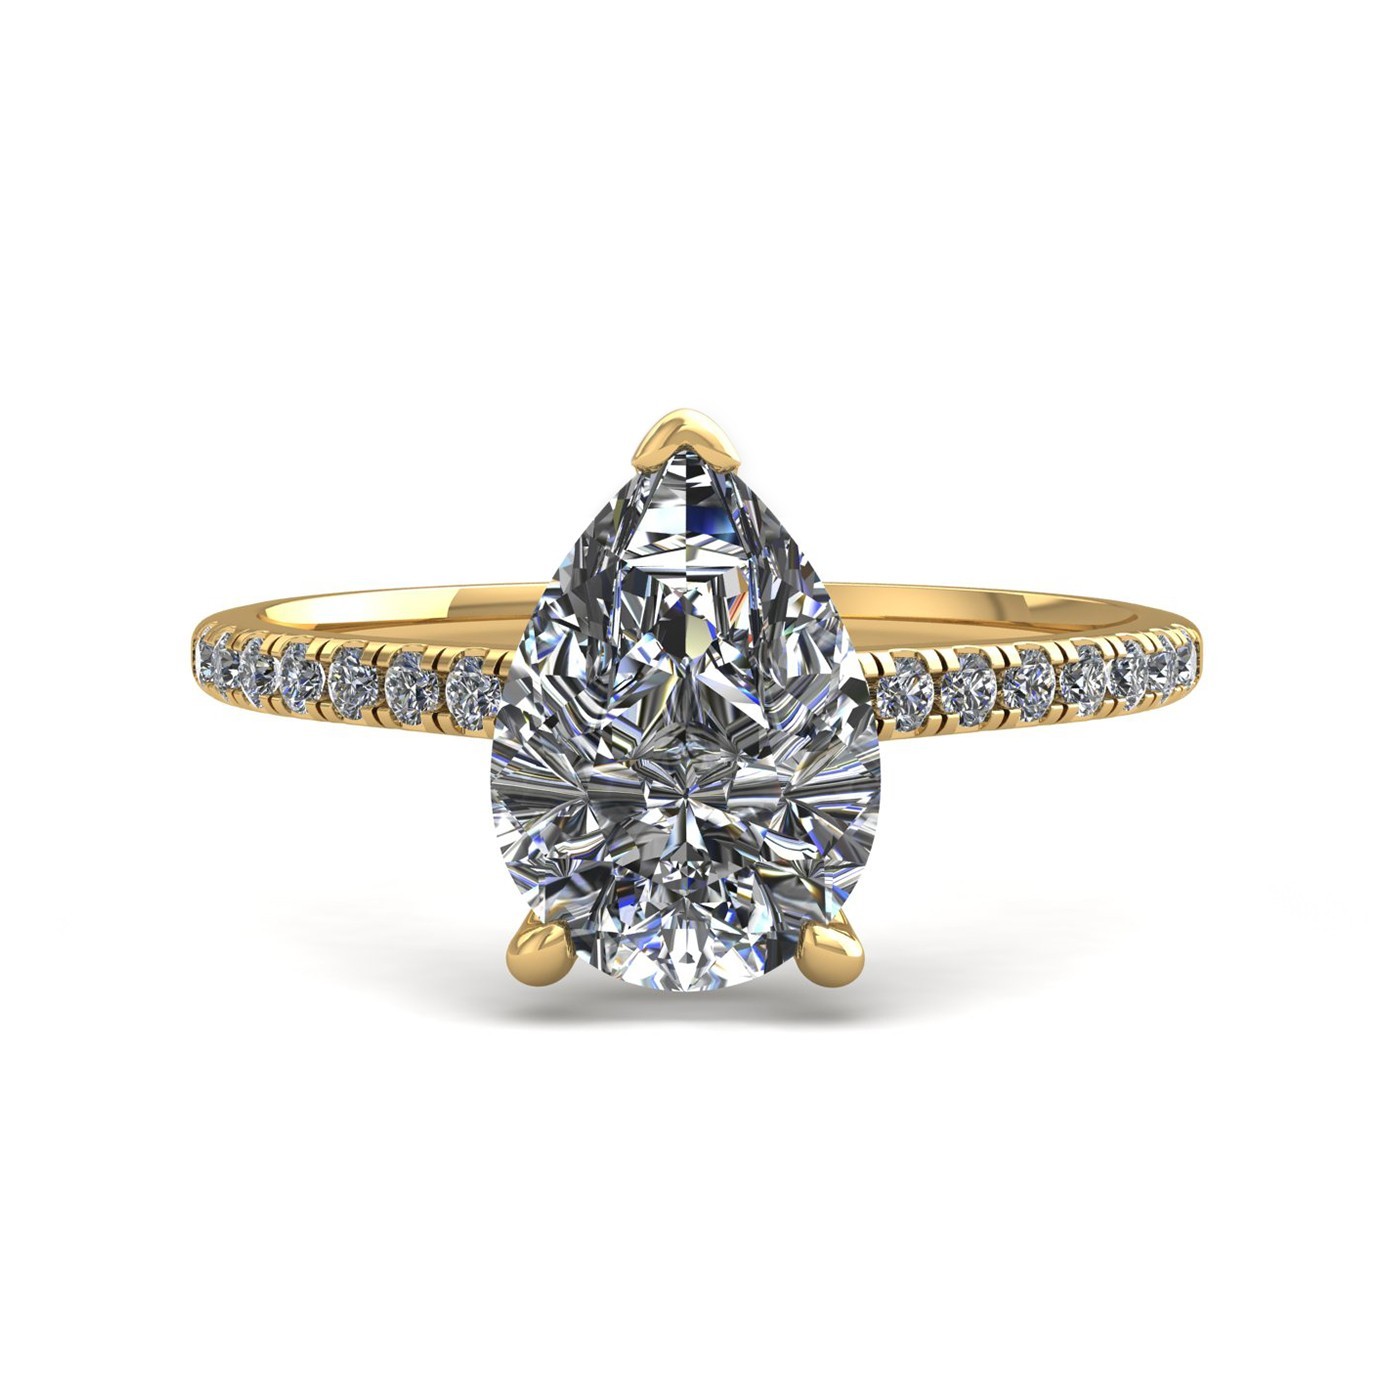 18k yellow gold 1.0ct 3 prongs pear diamond engagement ring with whisper thin pavÉ set band Photos & images